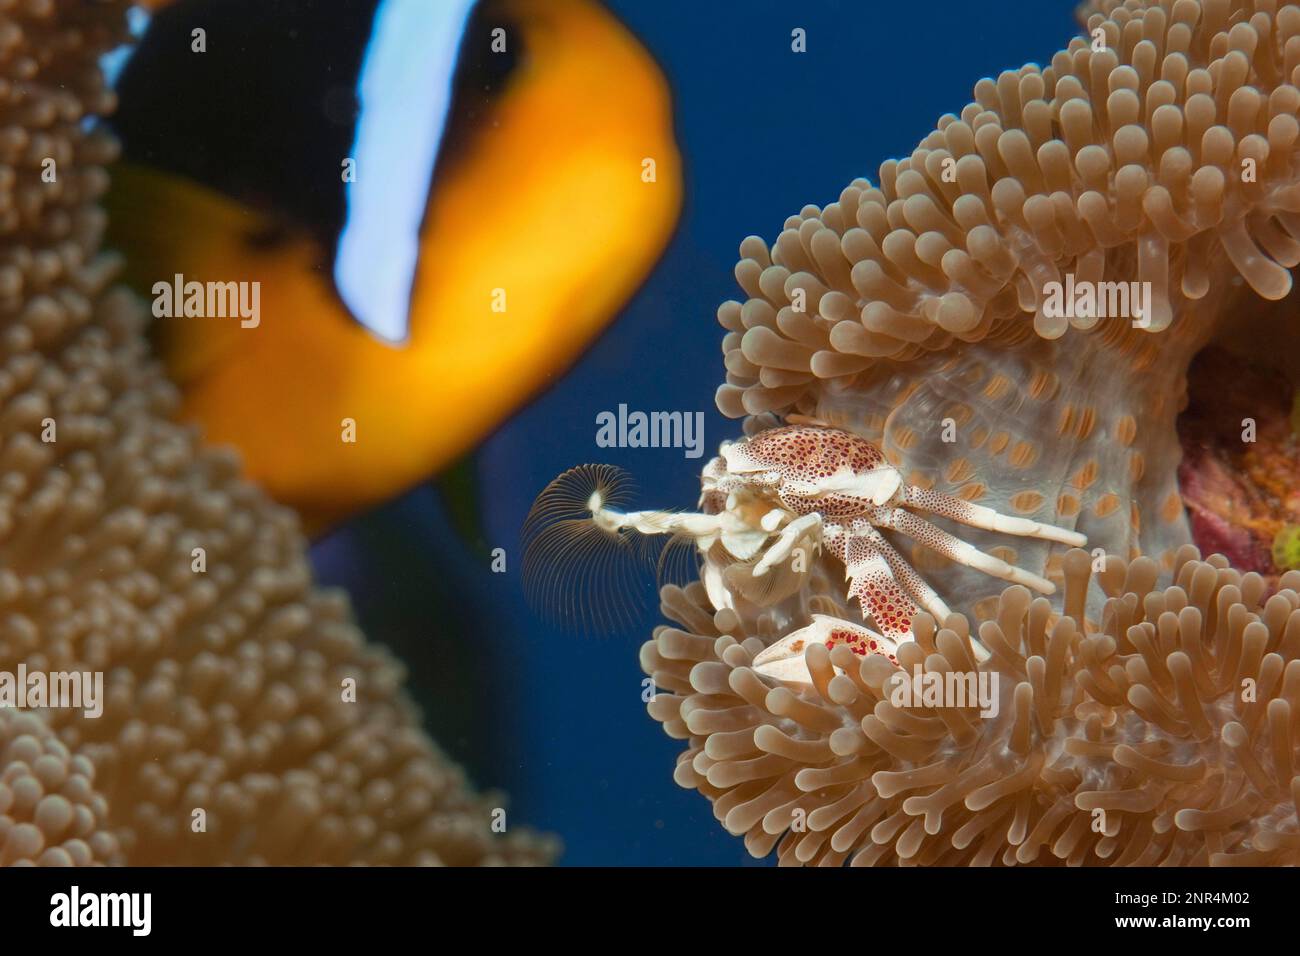 Spotted anemone crab, Spotted anemone crab, catches plankton, Indo-Pacific, spotted porcelain crab (Neopetrolisthes maculatus) Stock Photo